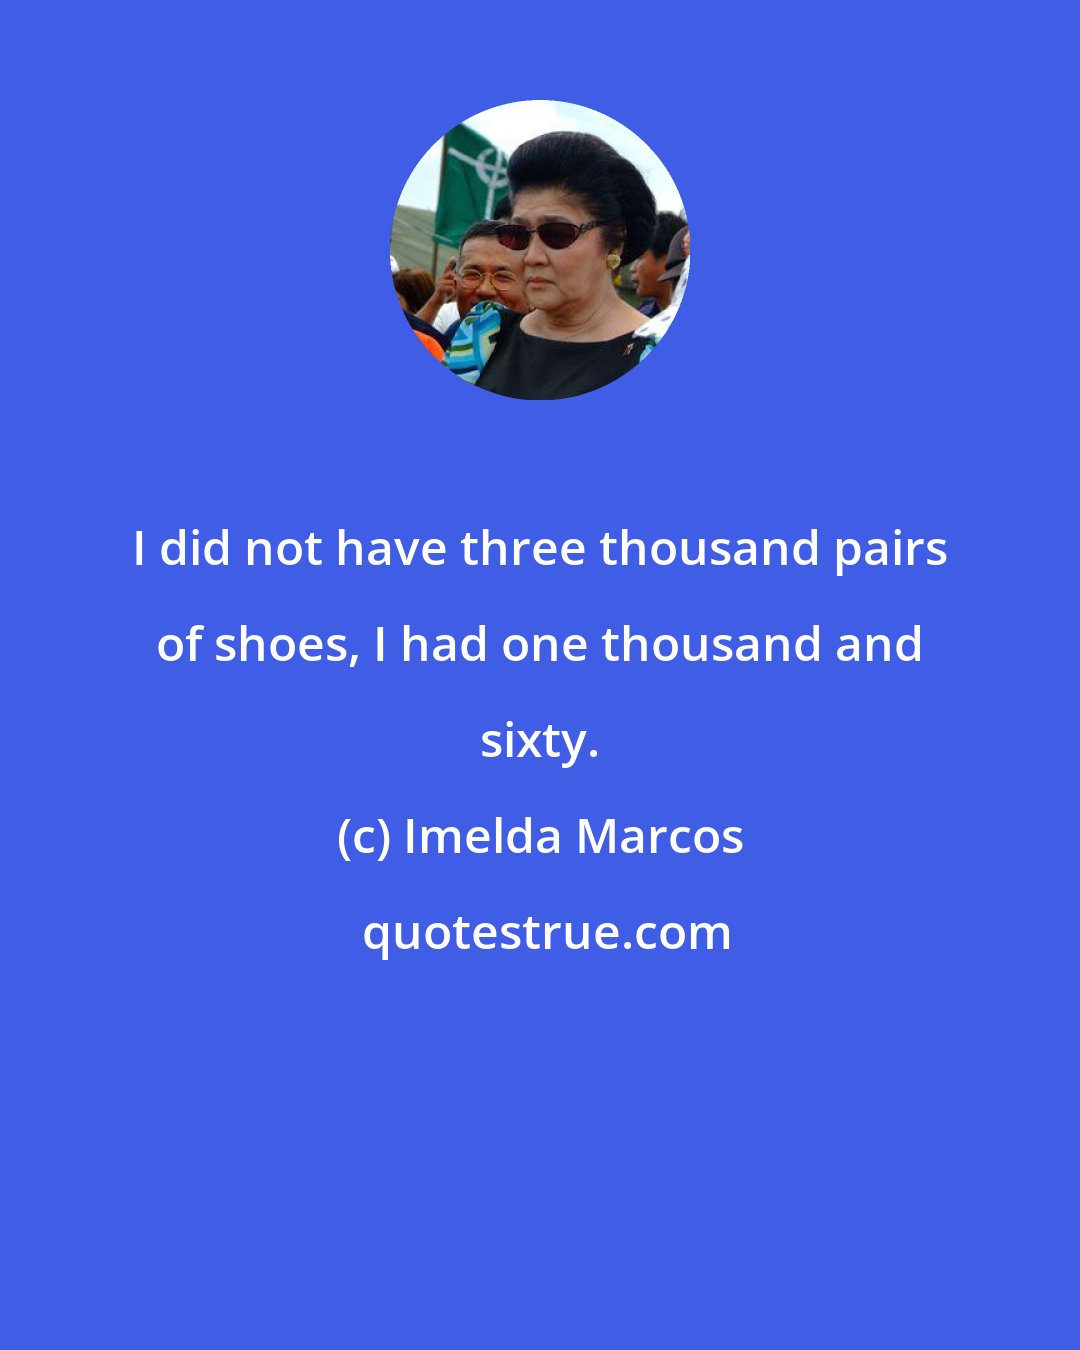 Imelda Marcos: I did not have three thousand pairs of shoes, I had one thousand and sixty.